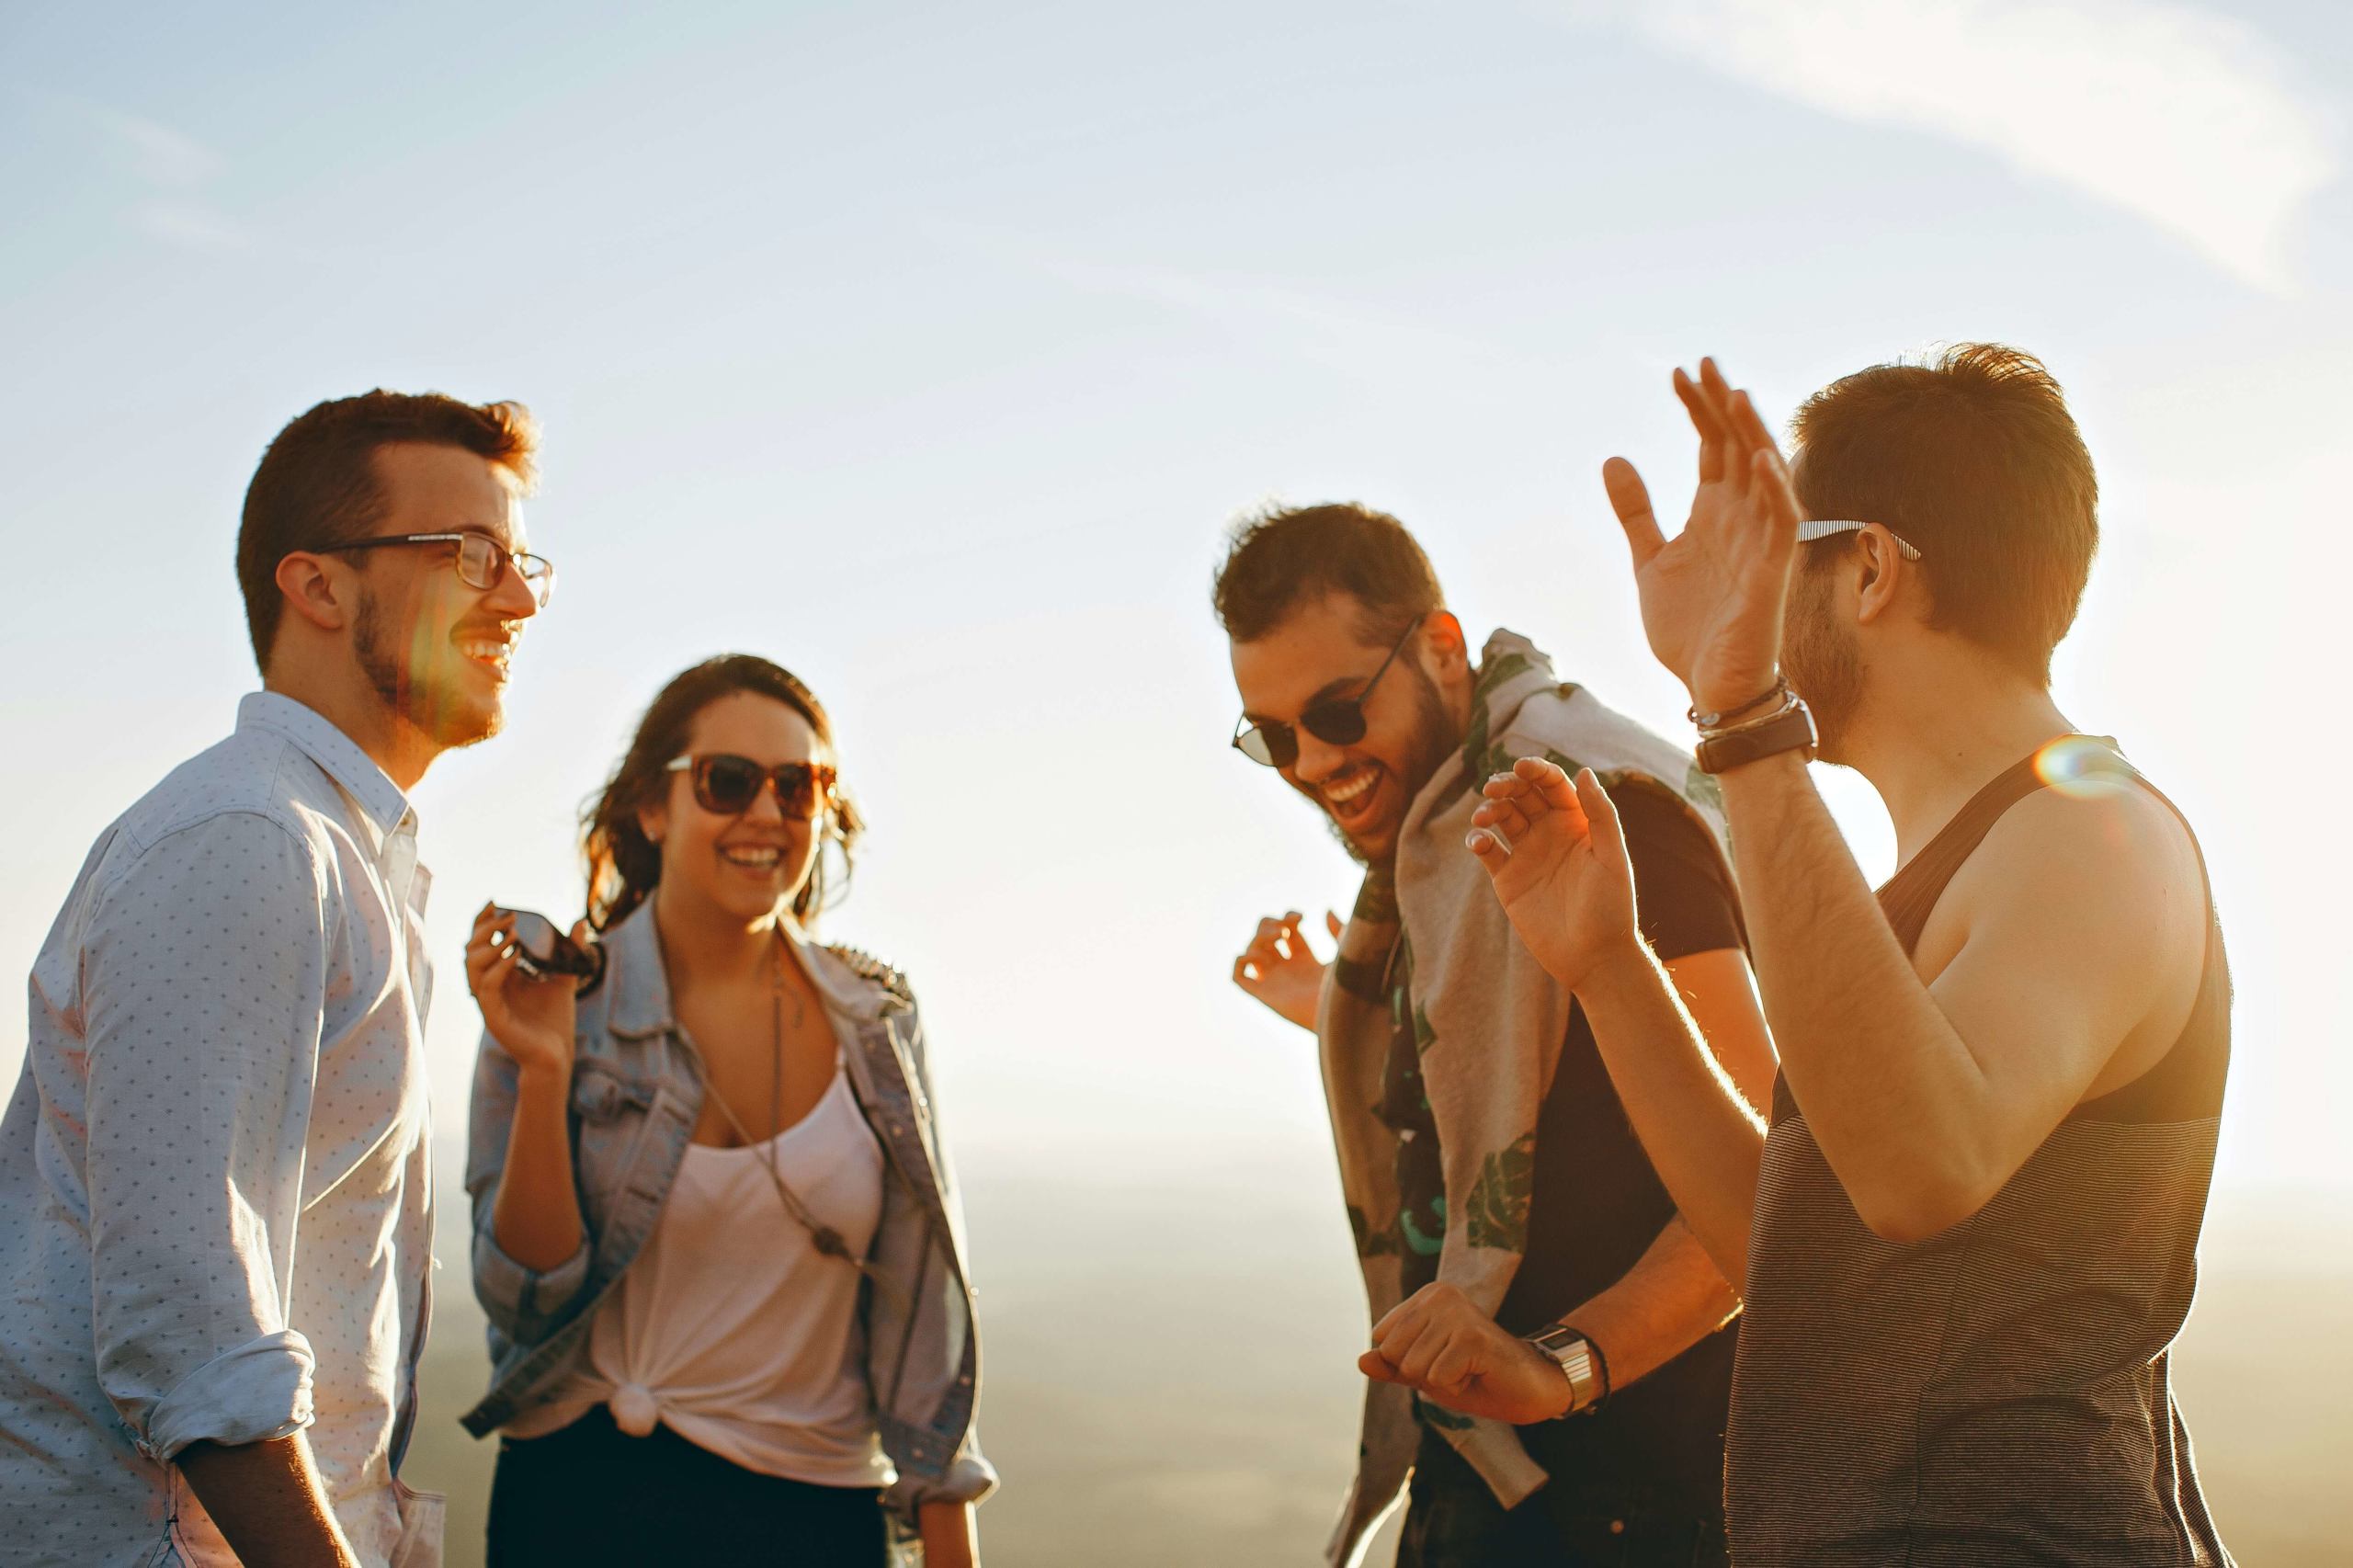 Image of a group of happy individuals standing outside laughing and smiling on a sunny day. Relationships are an important part of life. Meet with a skilled relational therapist in Austin, TX if you struggle to have meaningful relationships.